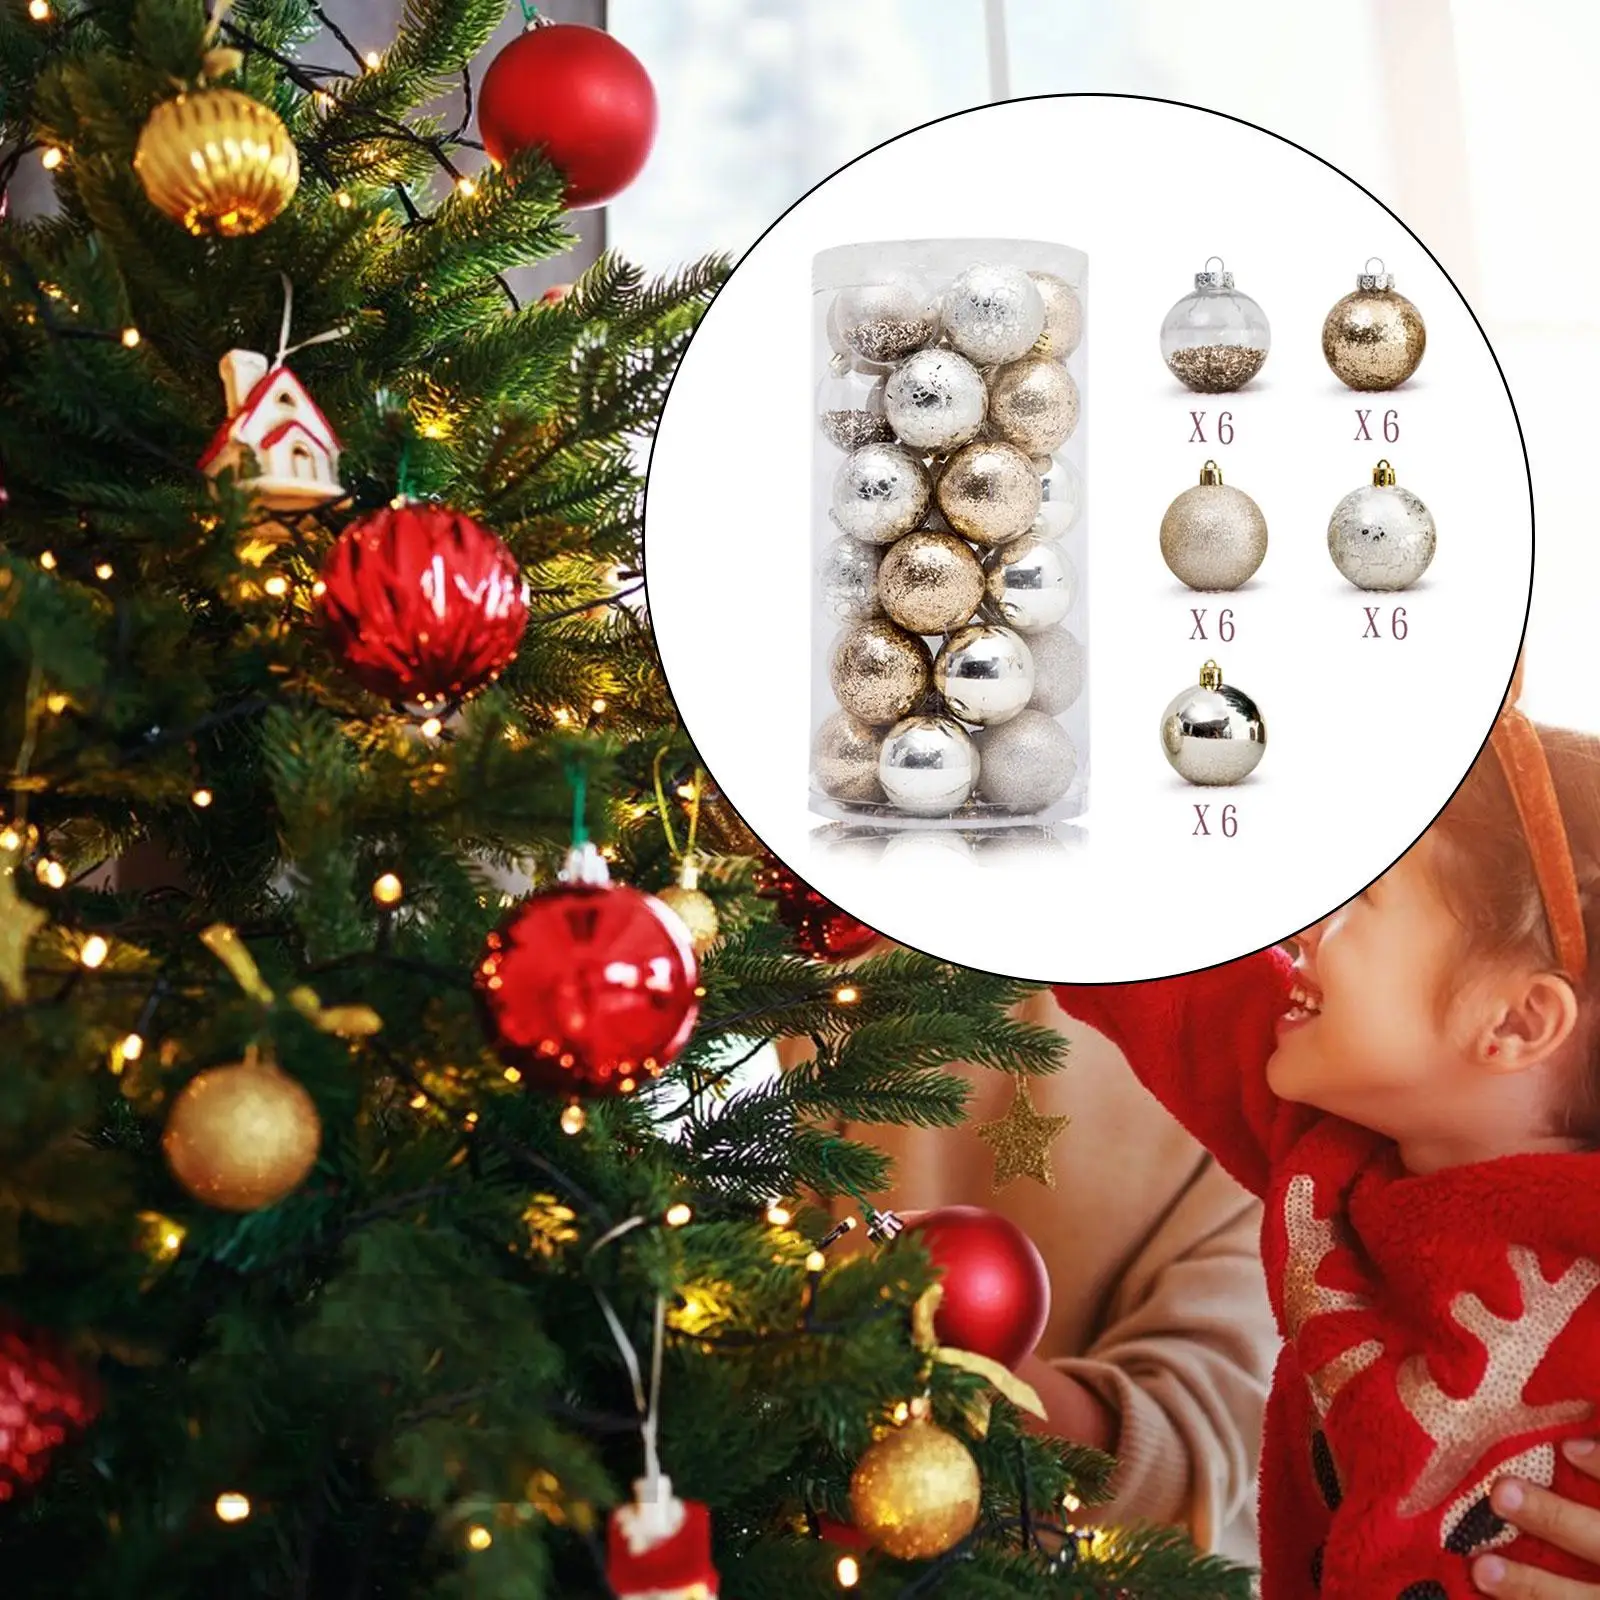 30 Pieces Christmas Ball Ornaments Shatterproof 6cm Christmas Tree Hanging Ornaments for New Year Indoor Porch Wedding Home